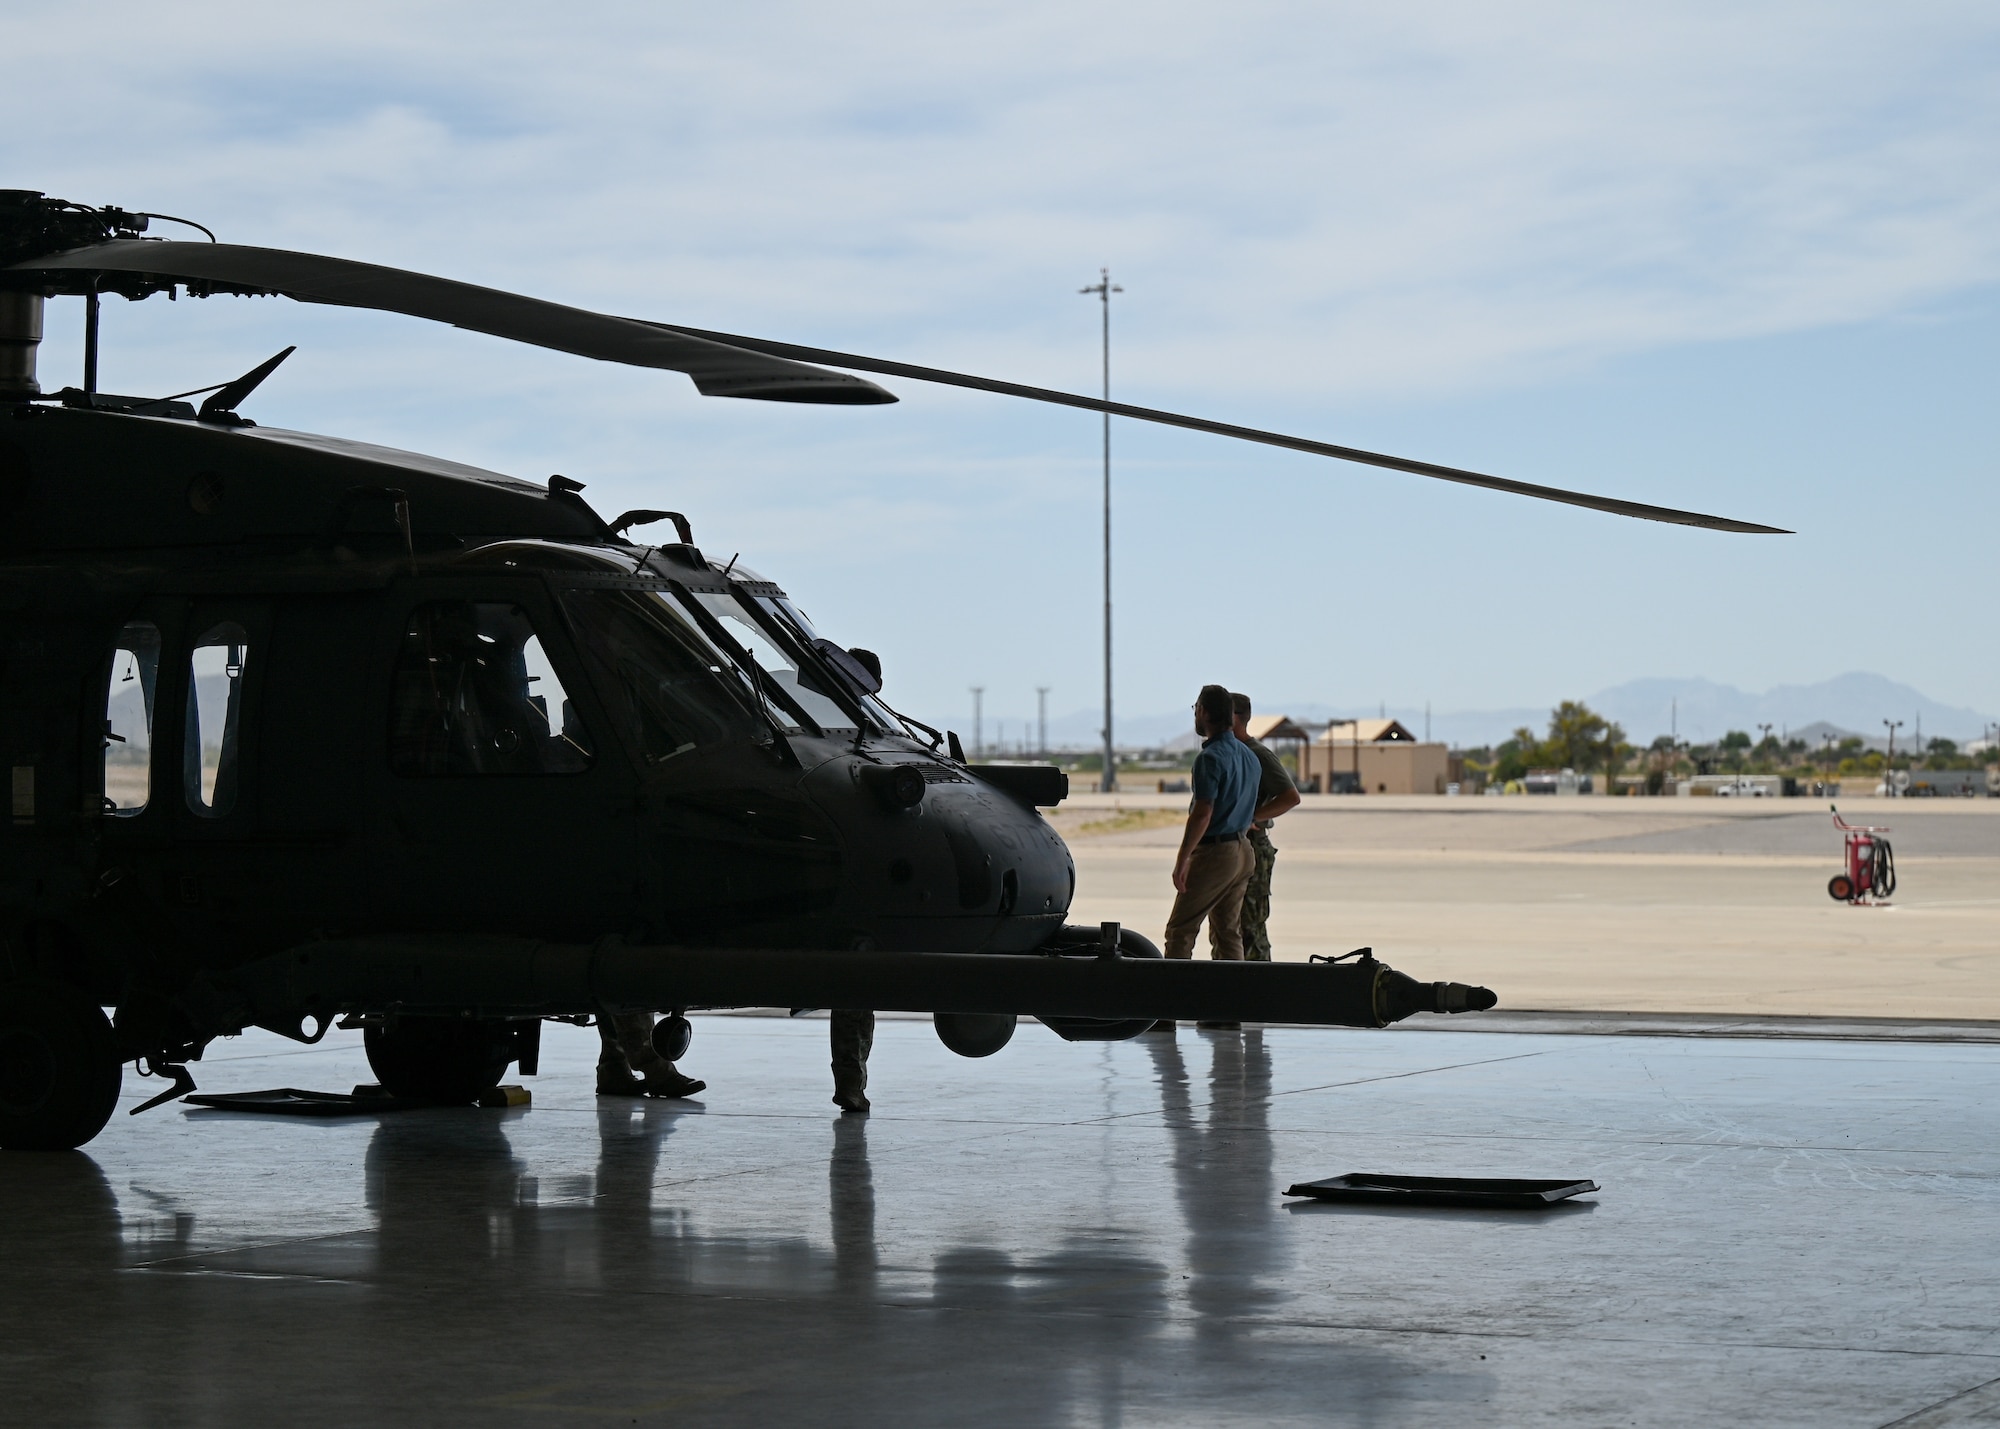 A helicopter is parked in a hangar.